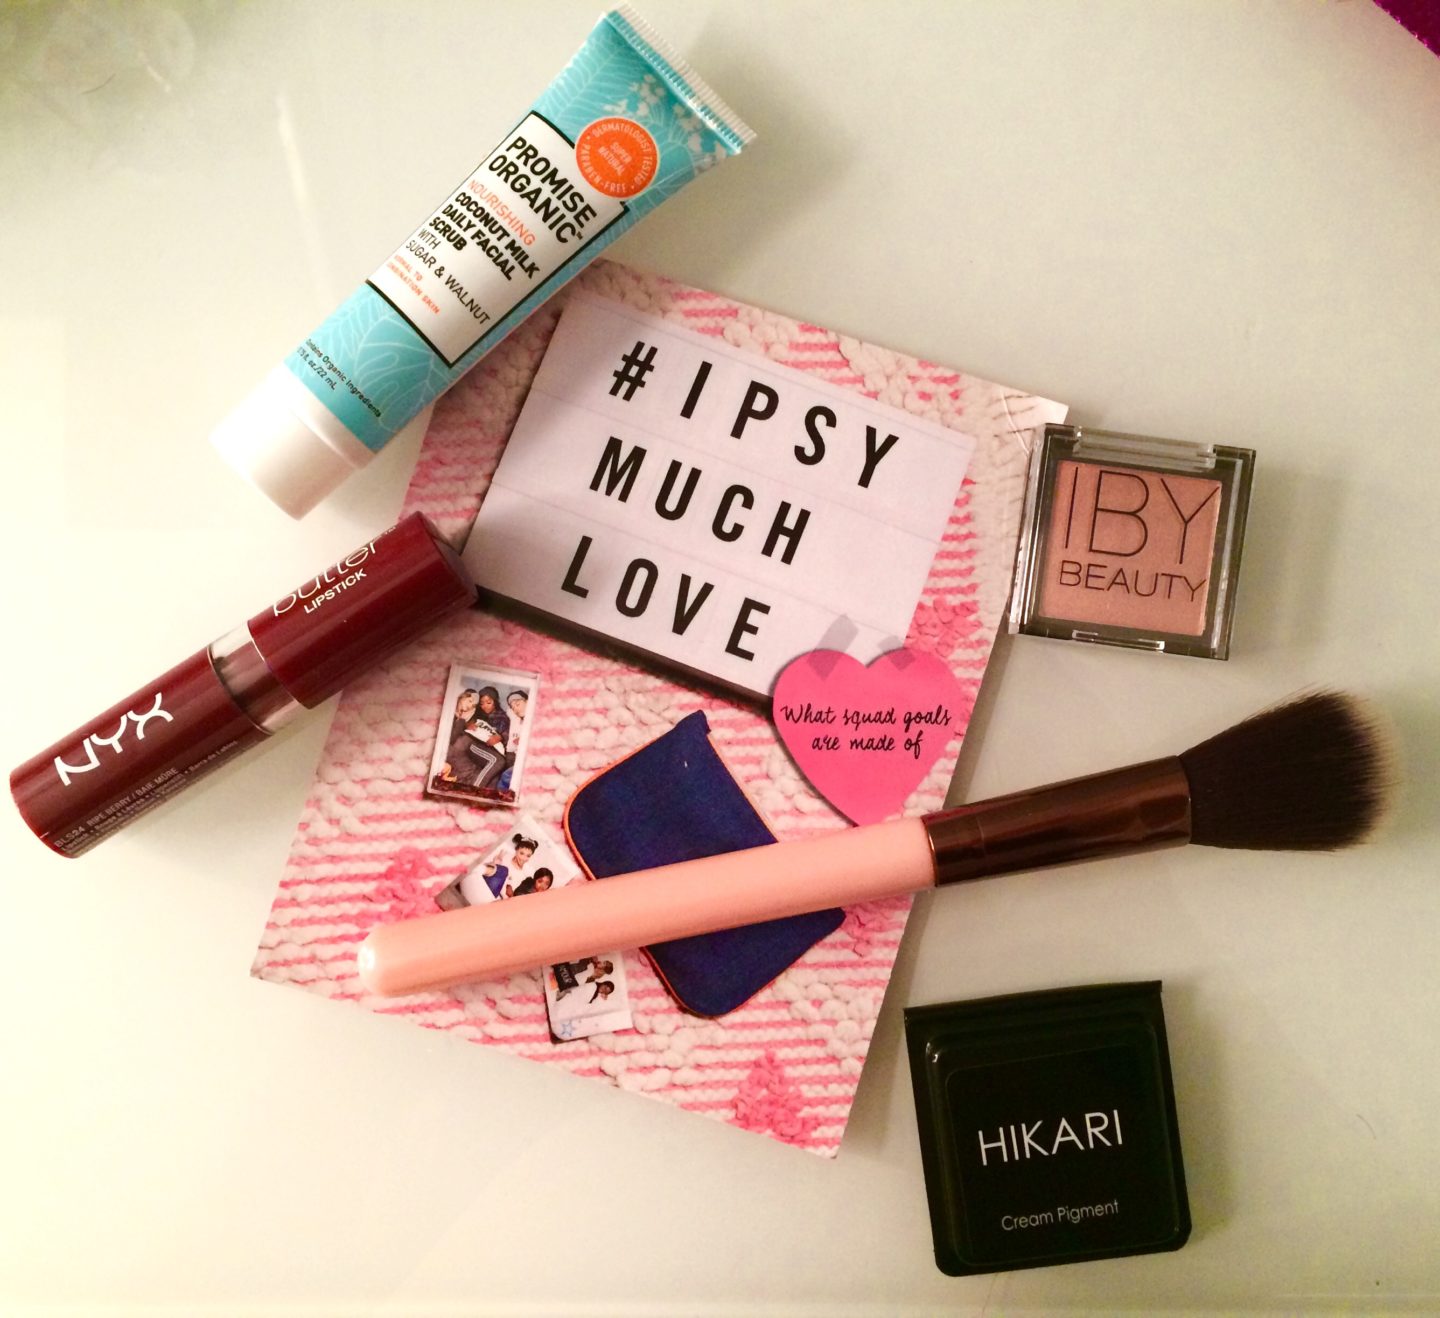 Ipsy Review